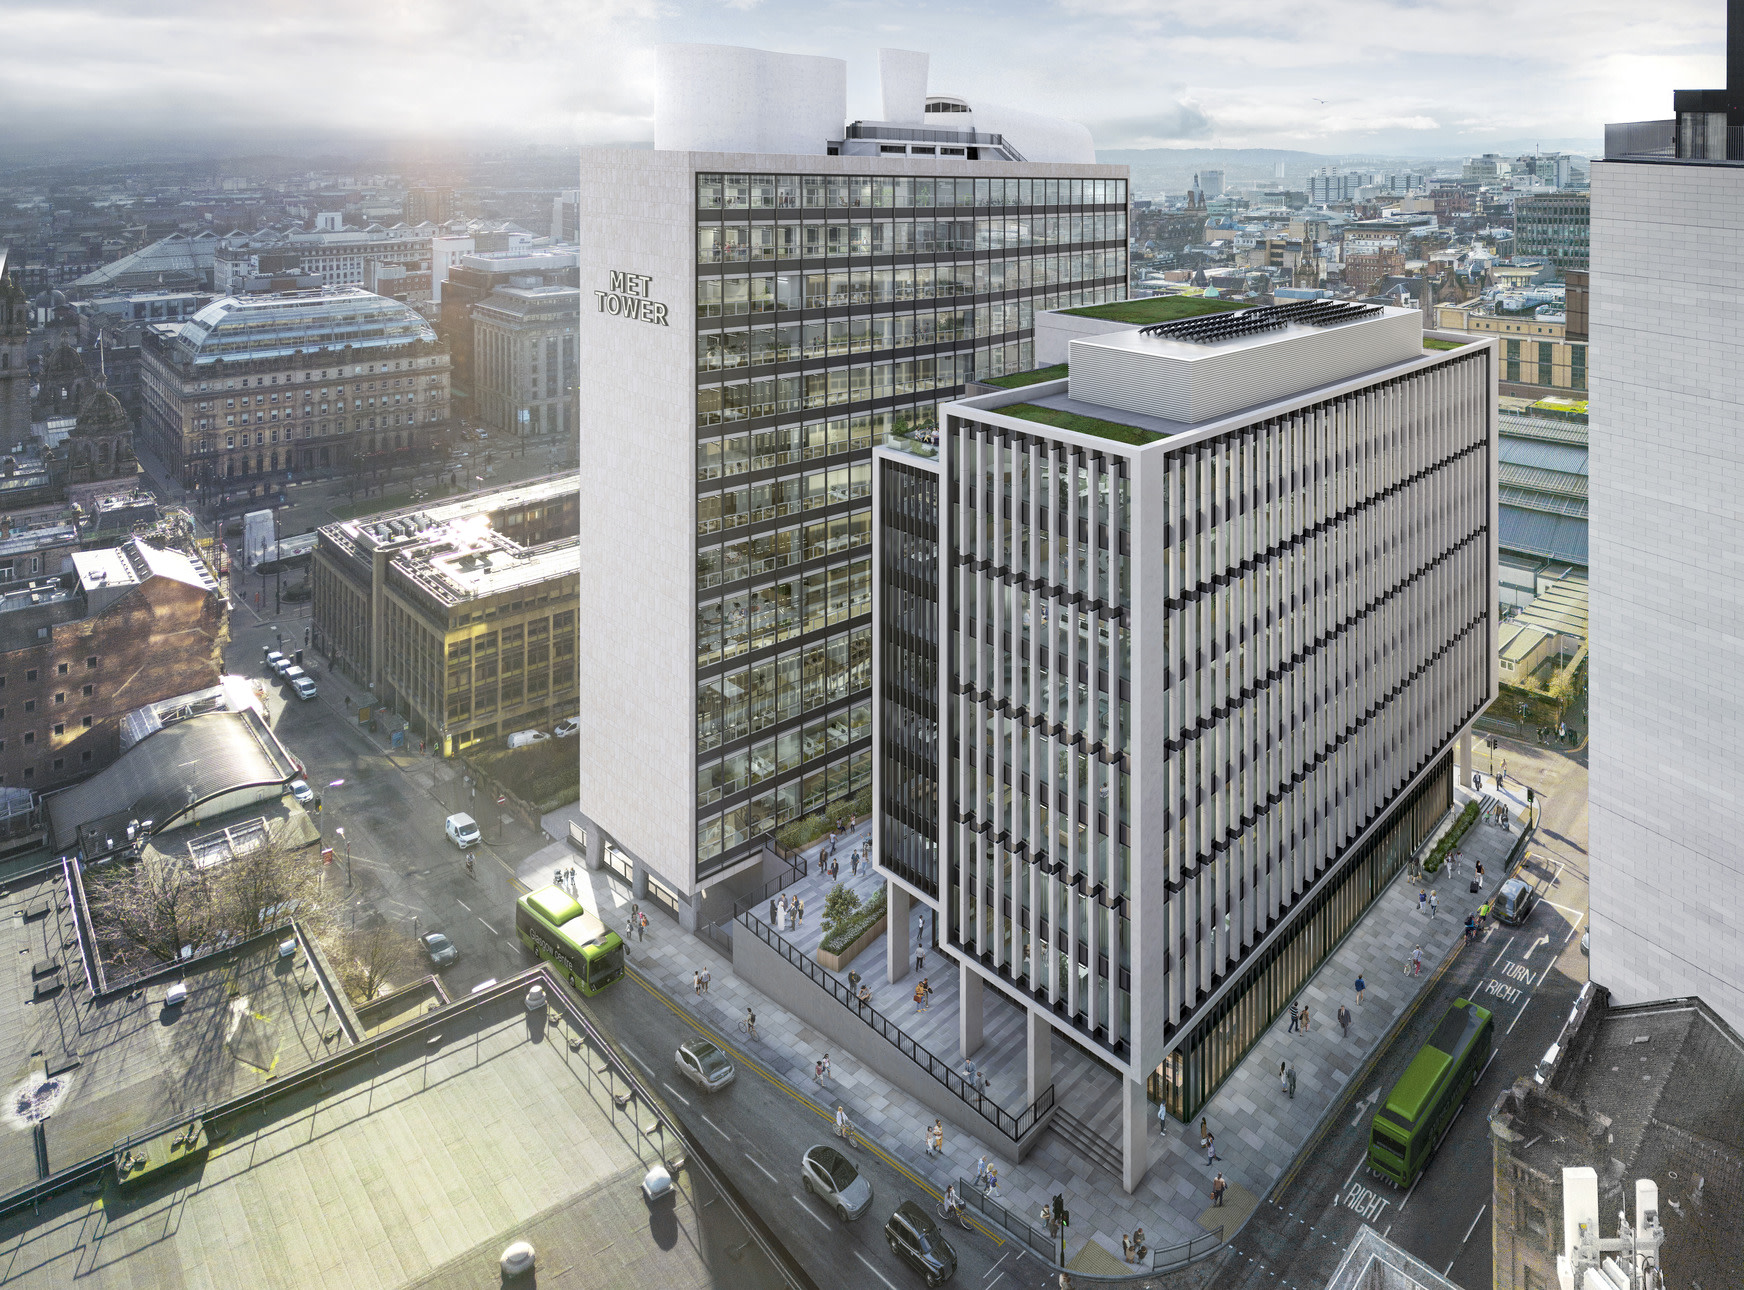 £60m vision unveiled for Glasgow's Met Tower as full plans submitted